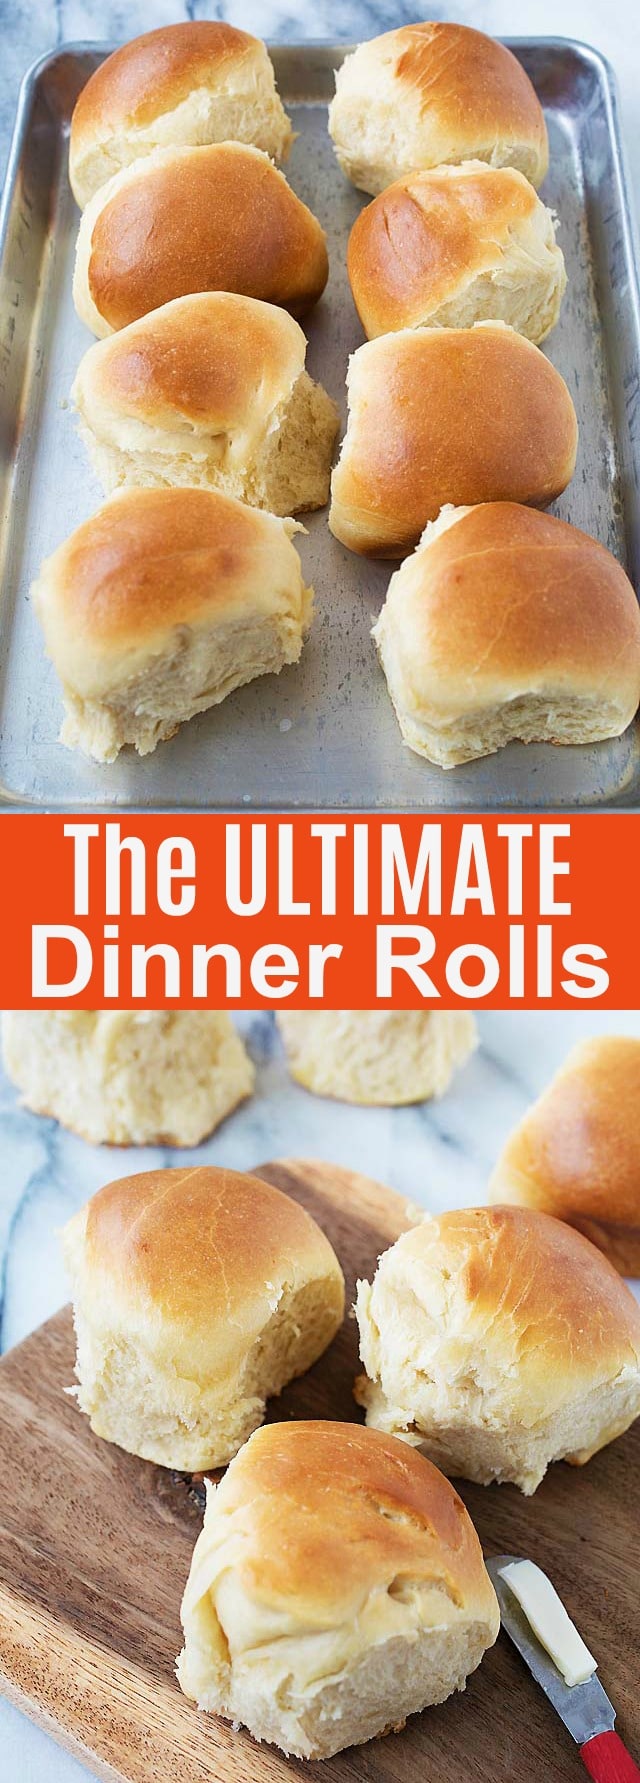 The Ultimate Dinner Rolls - this is the BEST homemade recipe that yields cotton soft, milky, rich and sweet rolls that you can't stop eating. Fail proof and novice baker friendly.